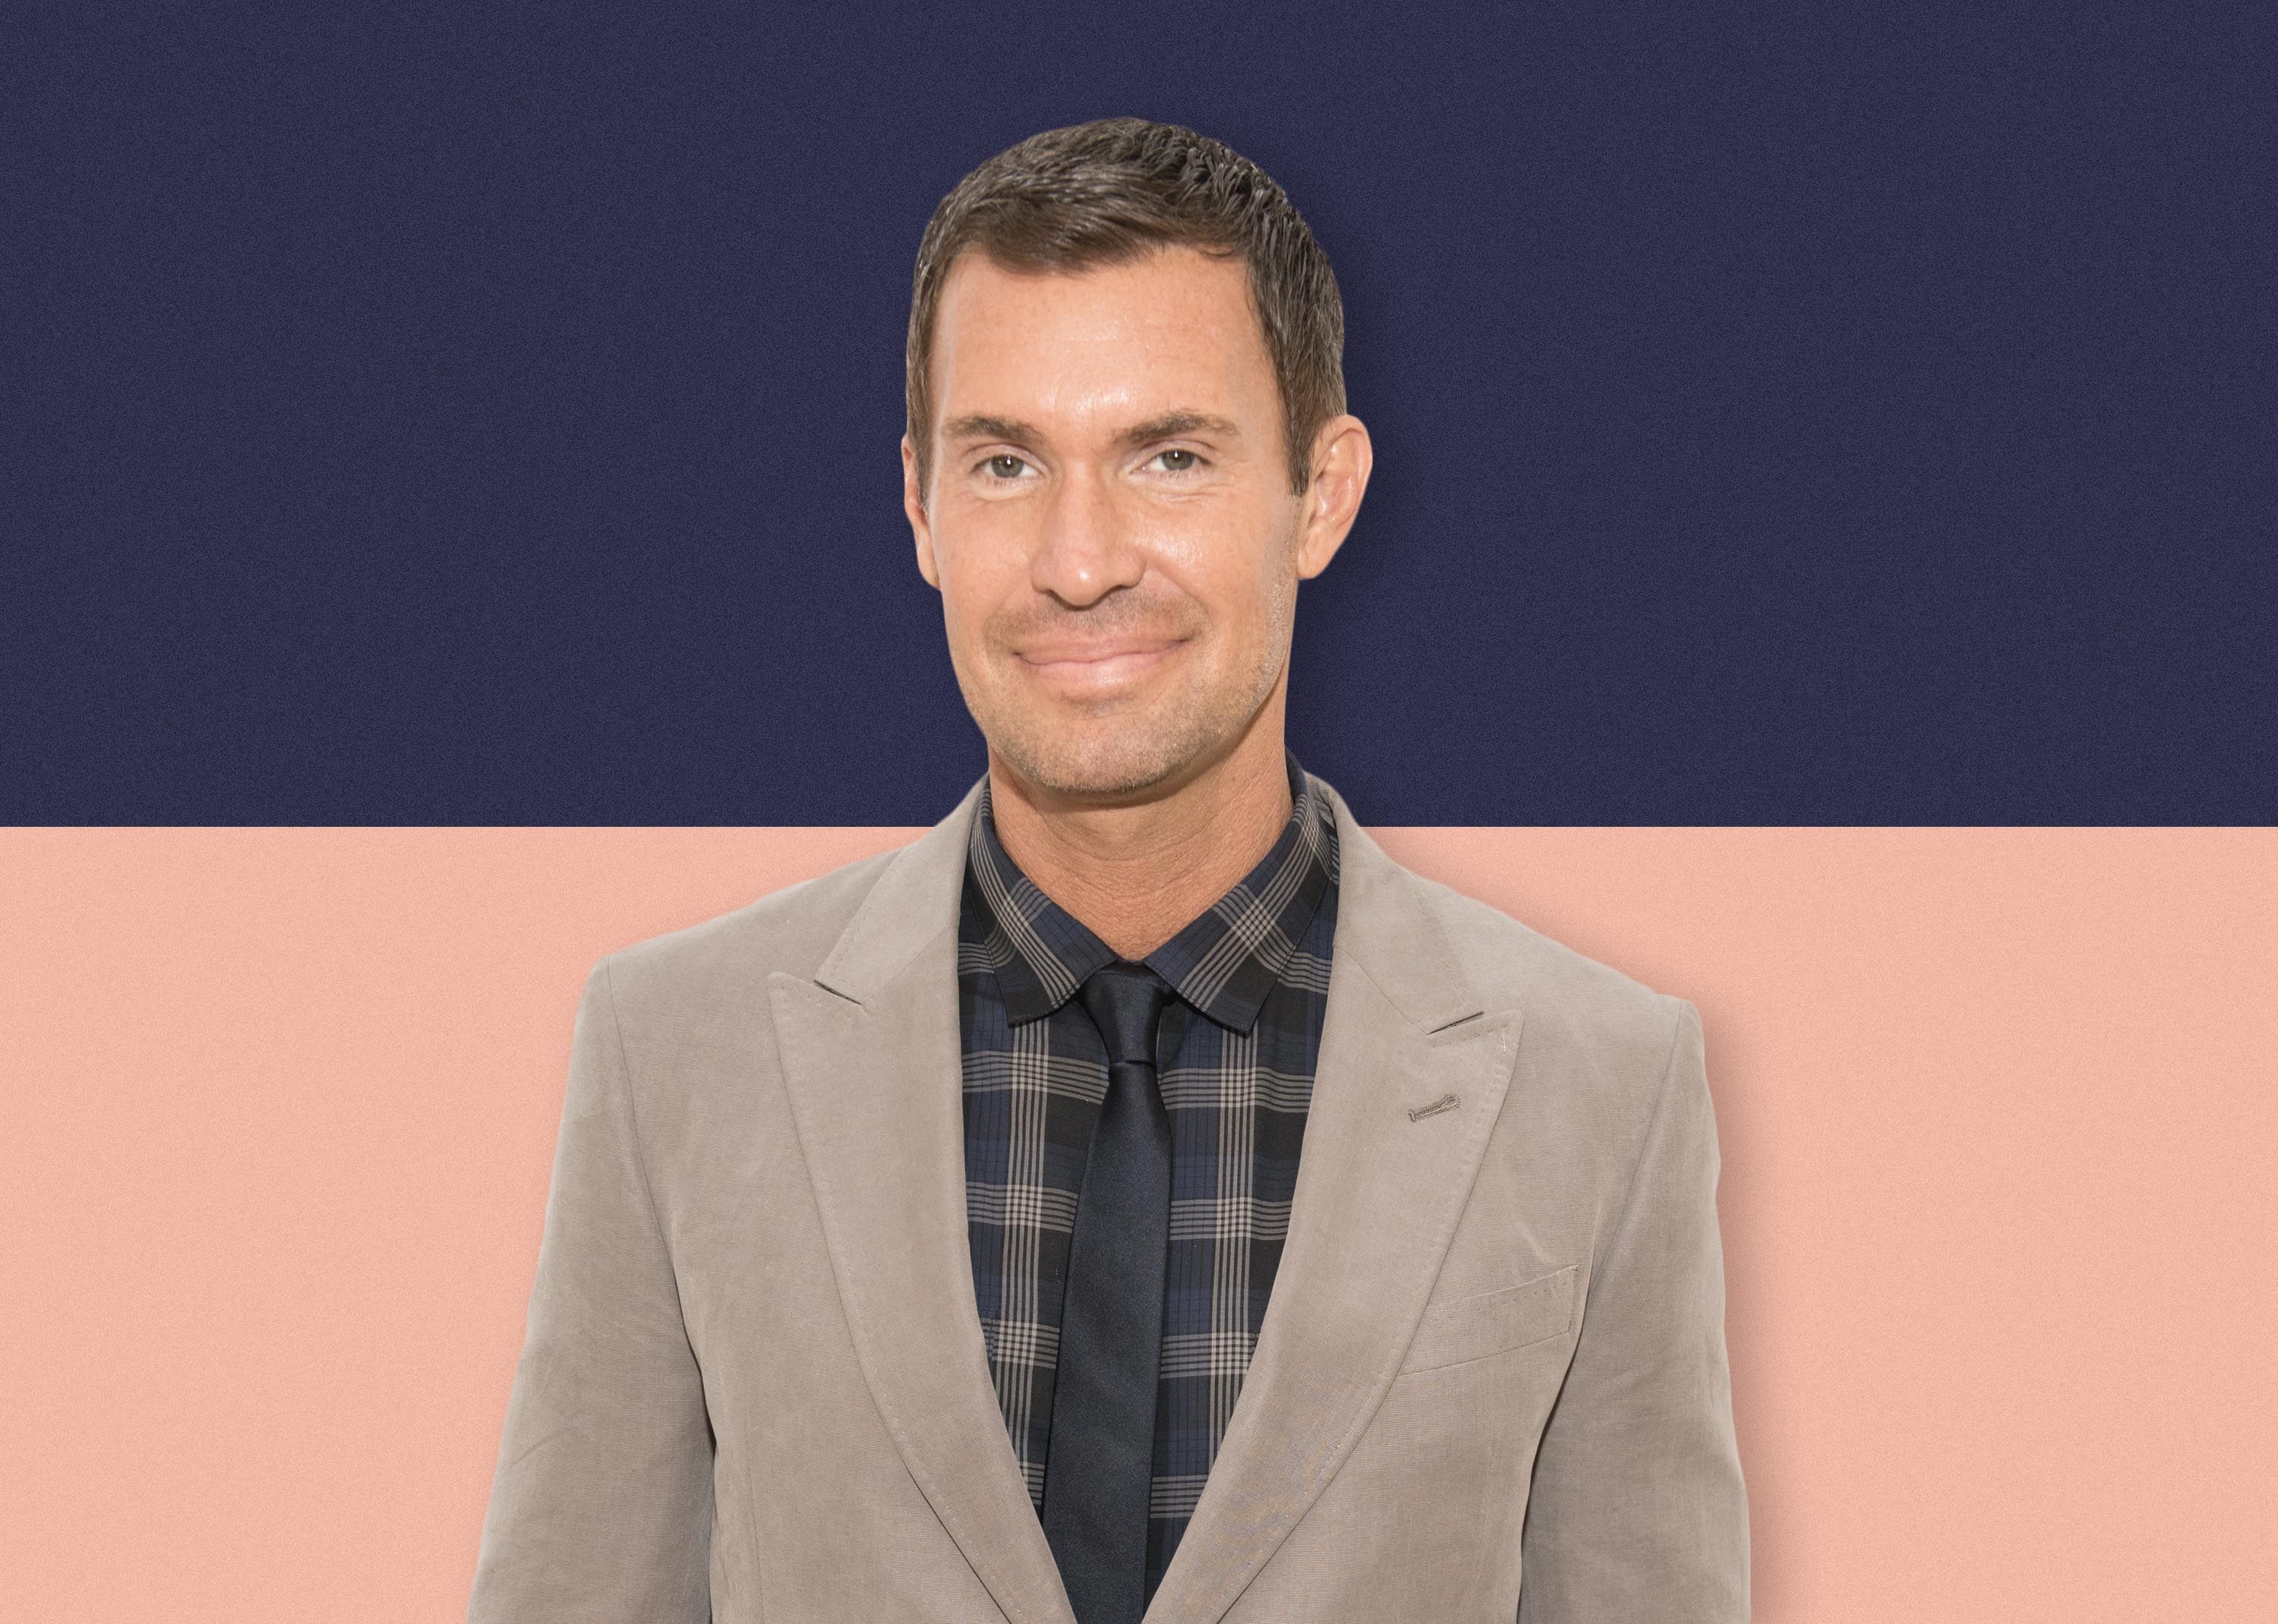 What Jeff Lewis Said About Megan Weaver - Fight And Drama Between The Flipping Out Cast